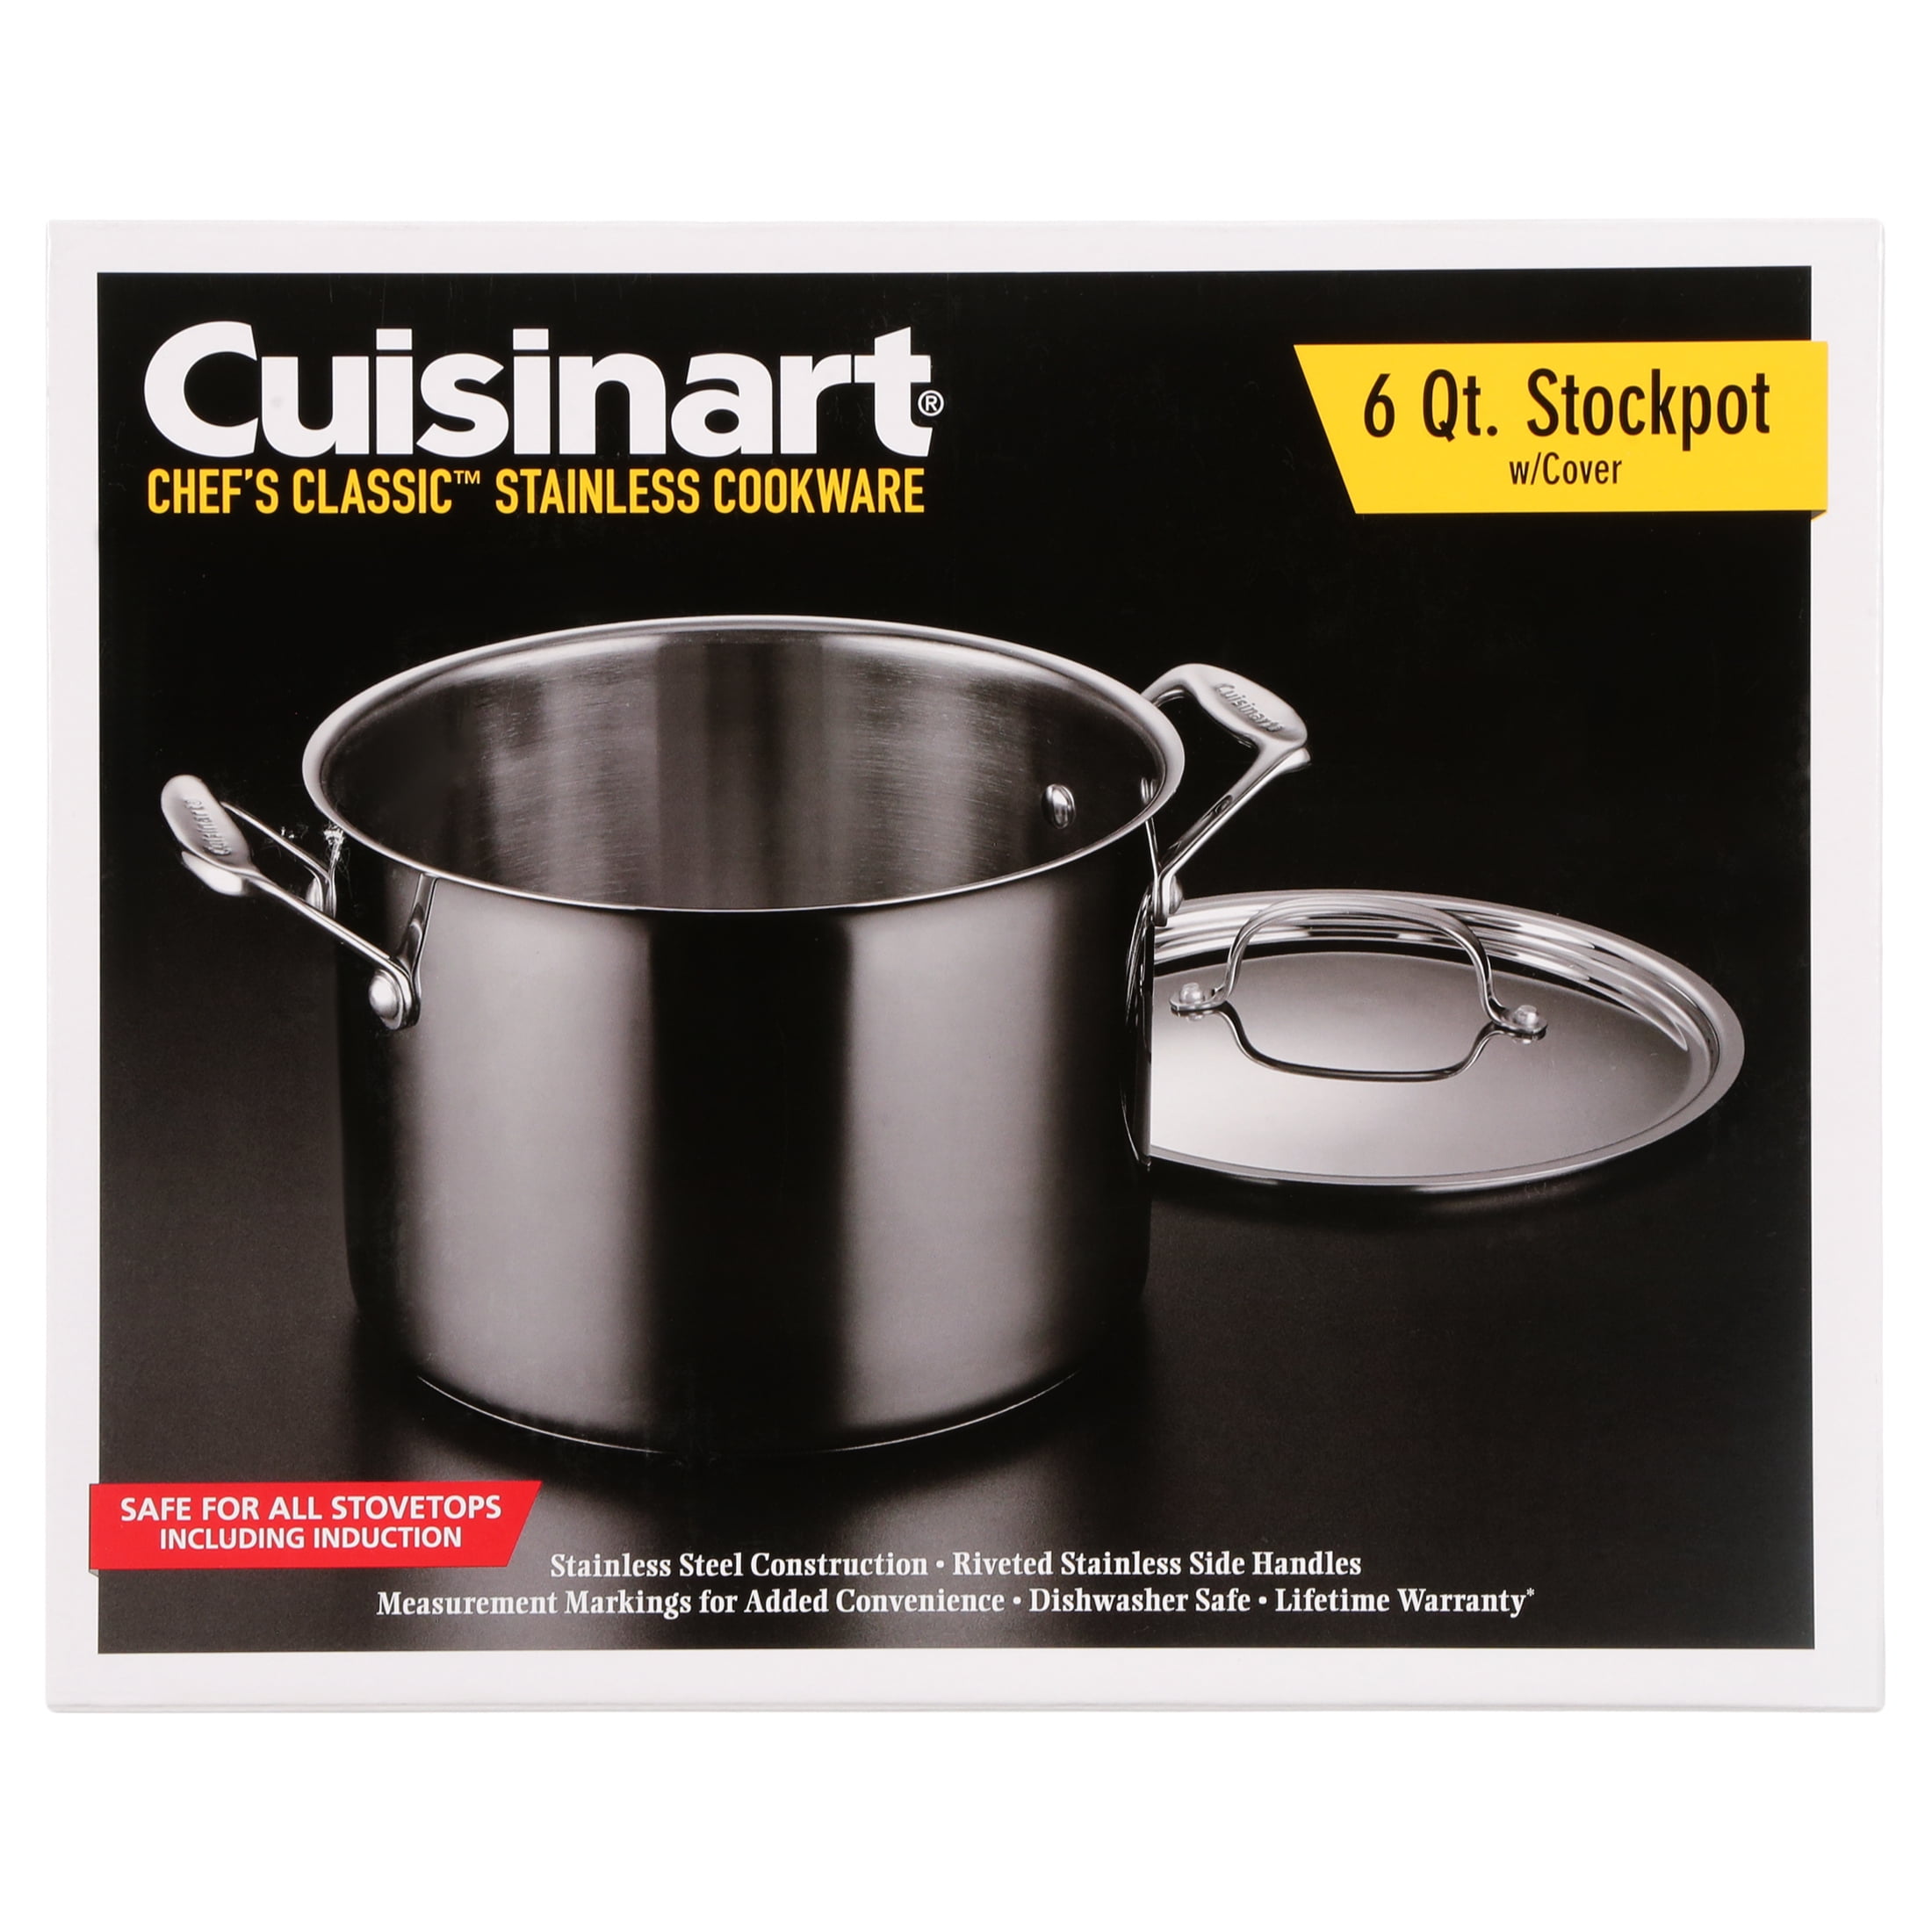 Cuisinart French Classic Tri-Ply Stainless 6 Quart Stockpot with Cover